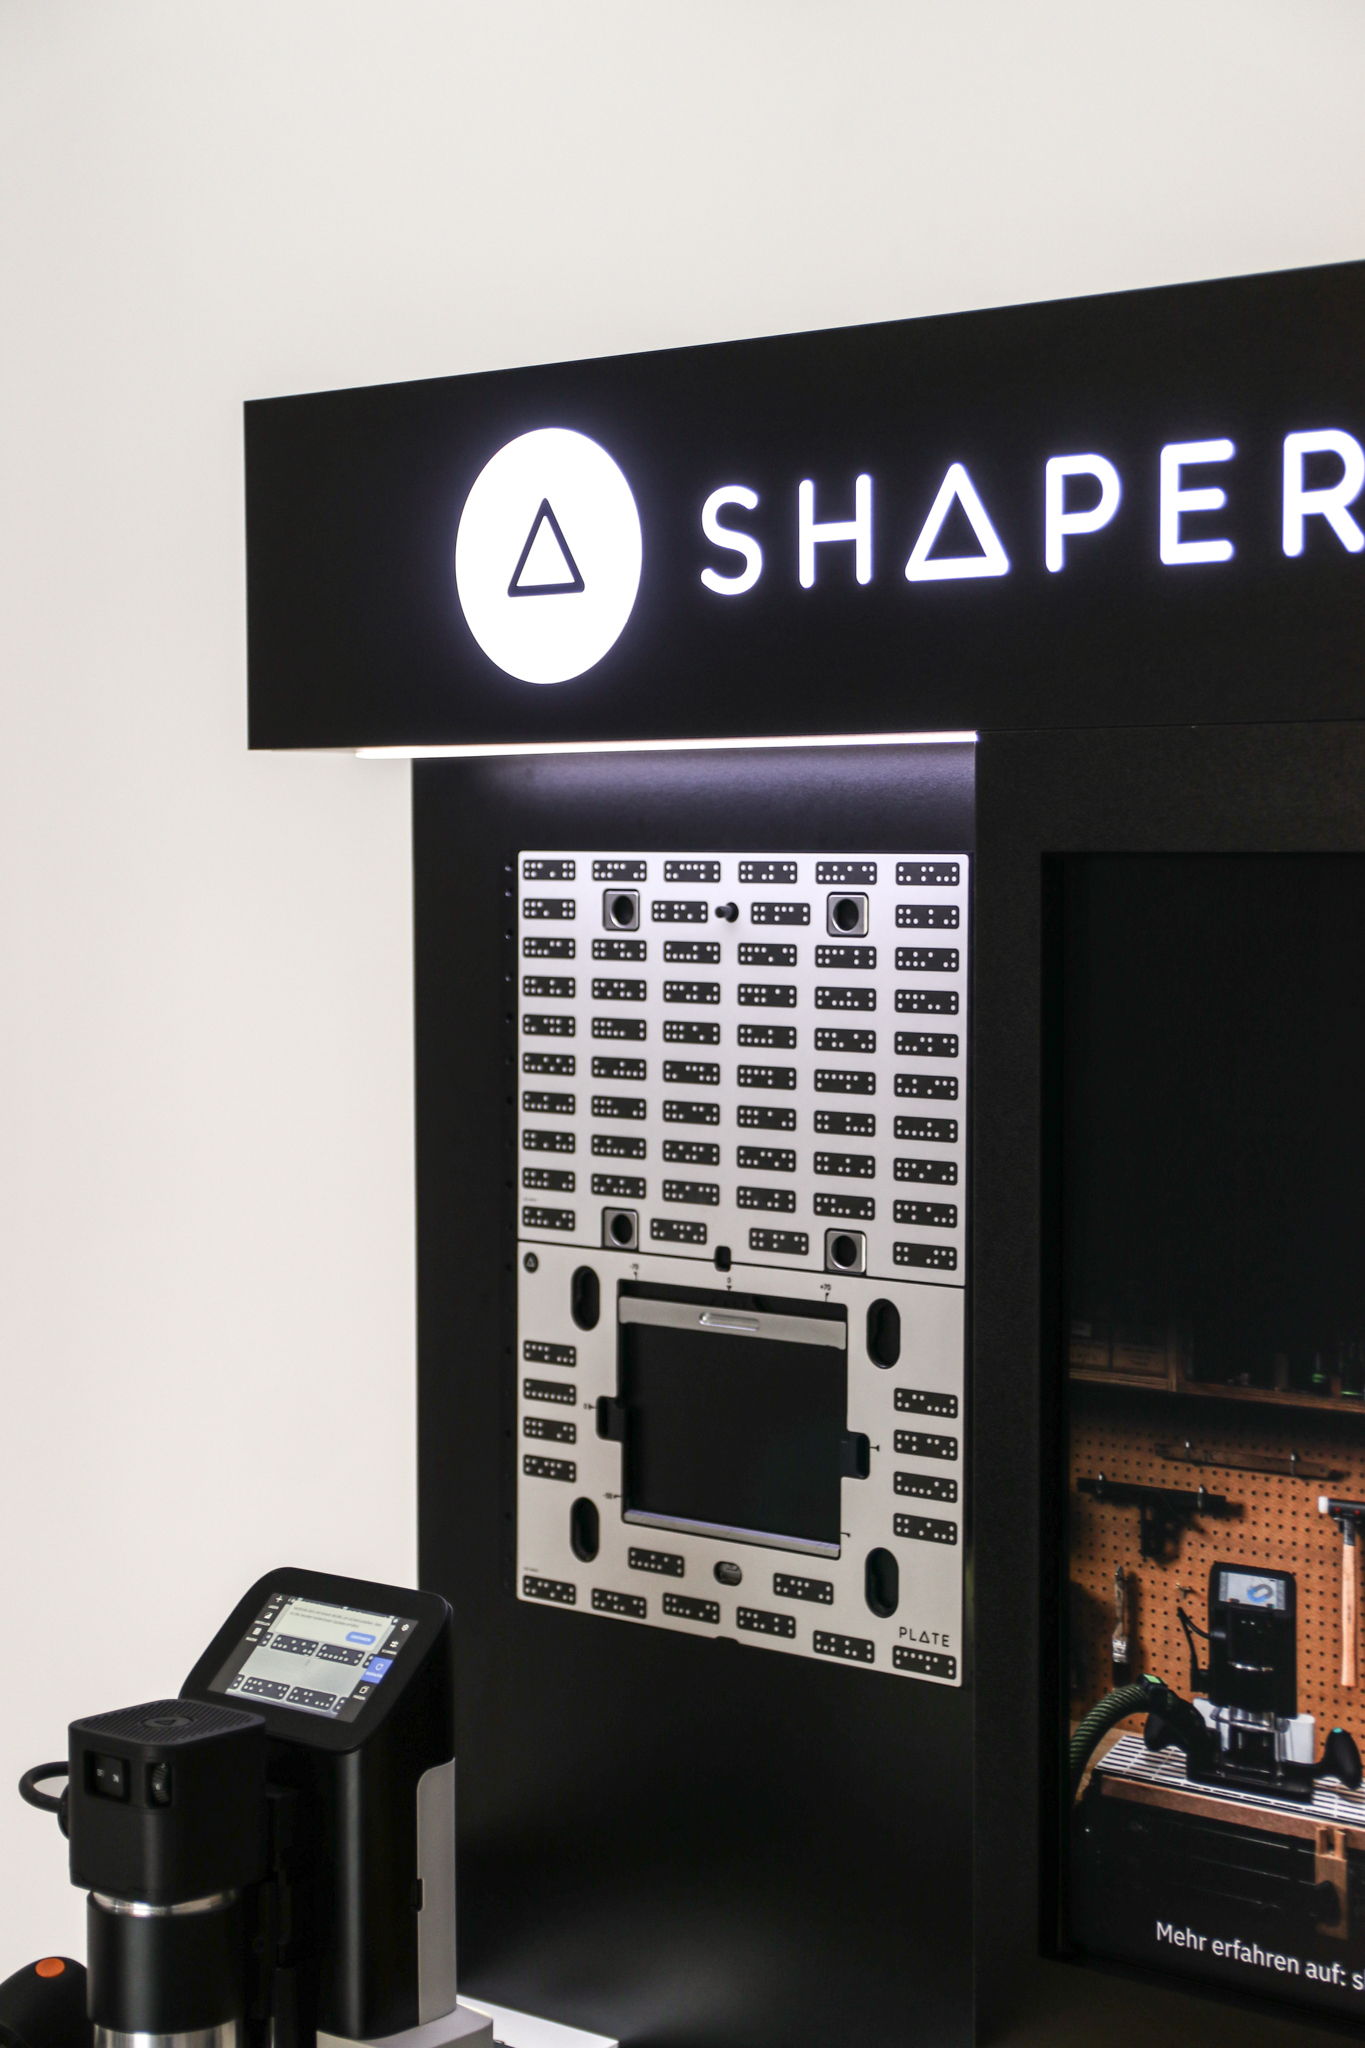 SHAPER TOOL POS Display by Future Supply